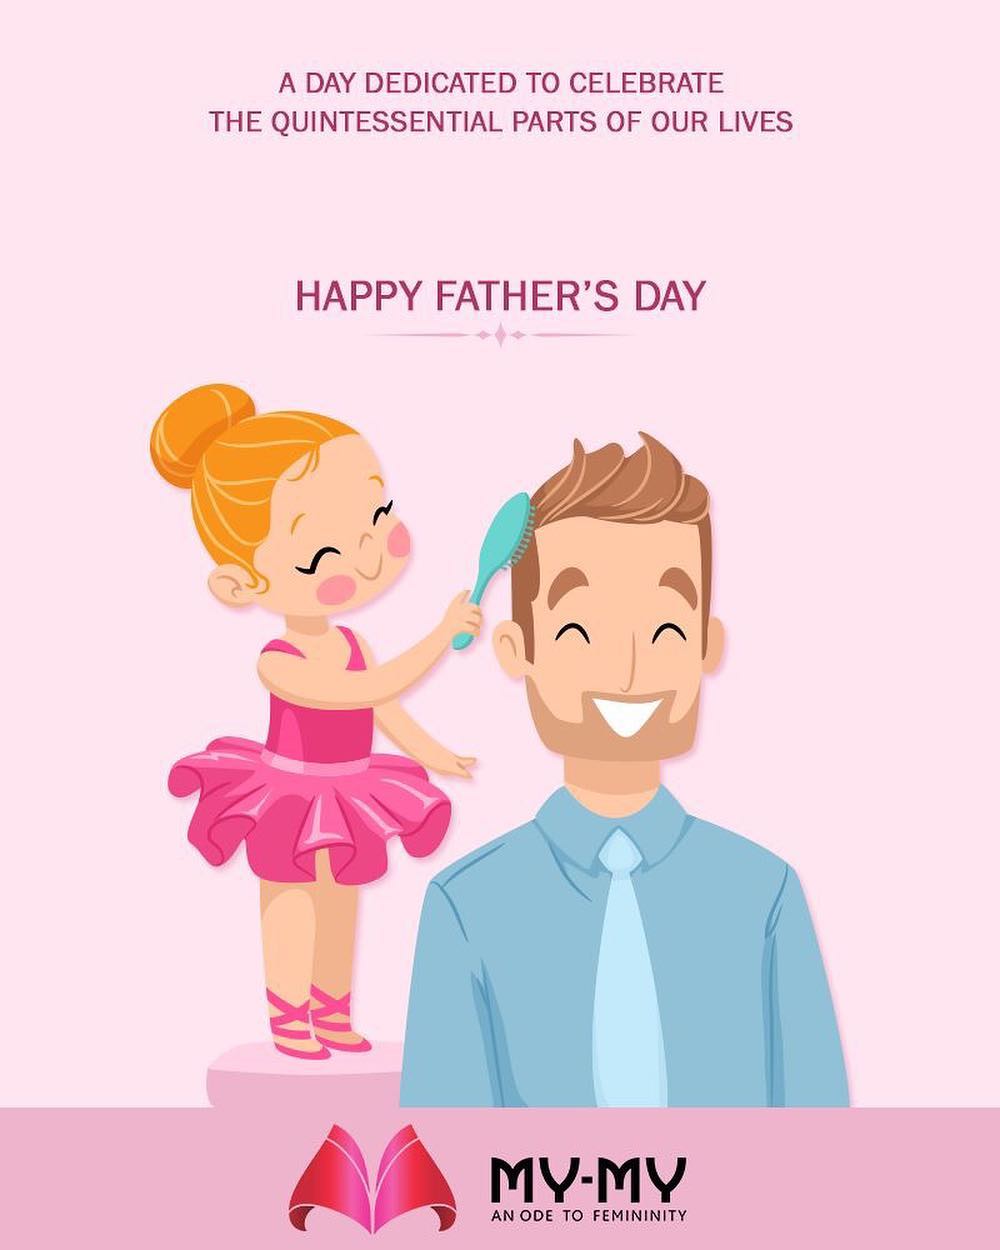 A day dedicated to celebrate the quintessential parts of our lives.

#HappyFathersDay #FathersDay #FathersDay2018 #FathersDay2k18 #MyMy #MyMyAhmedabad #Fashion #Ahmedabad